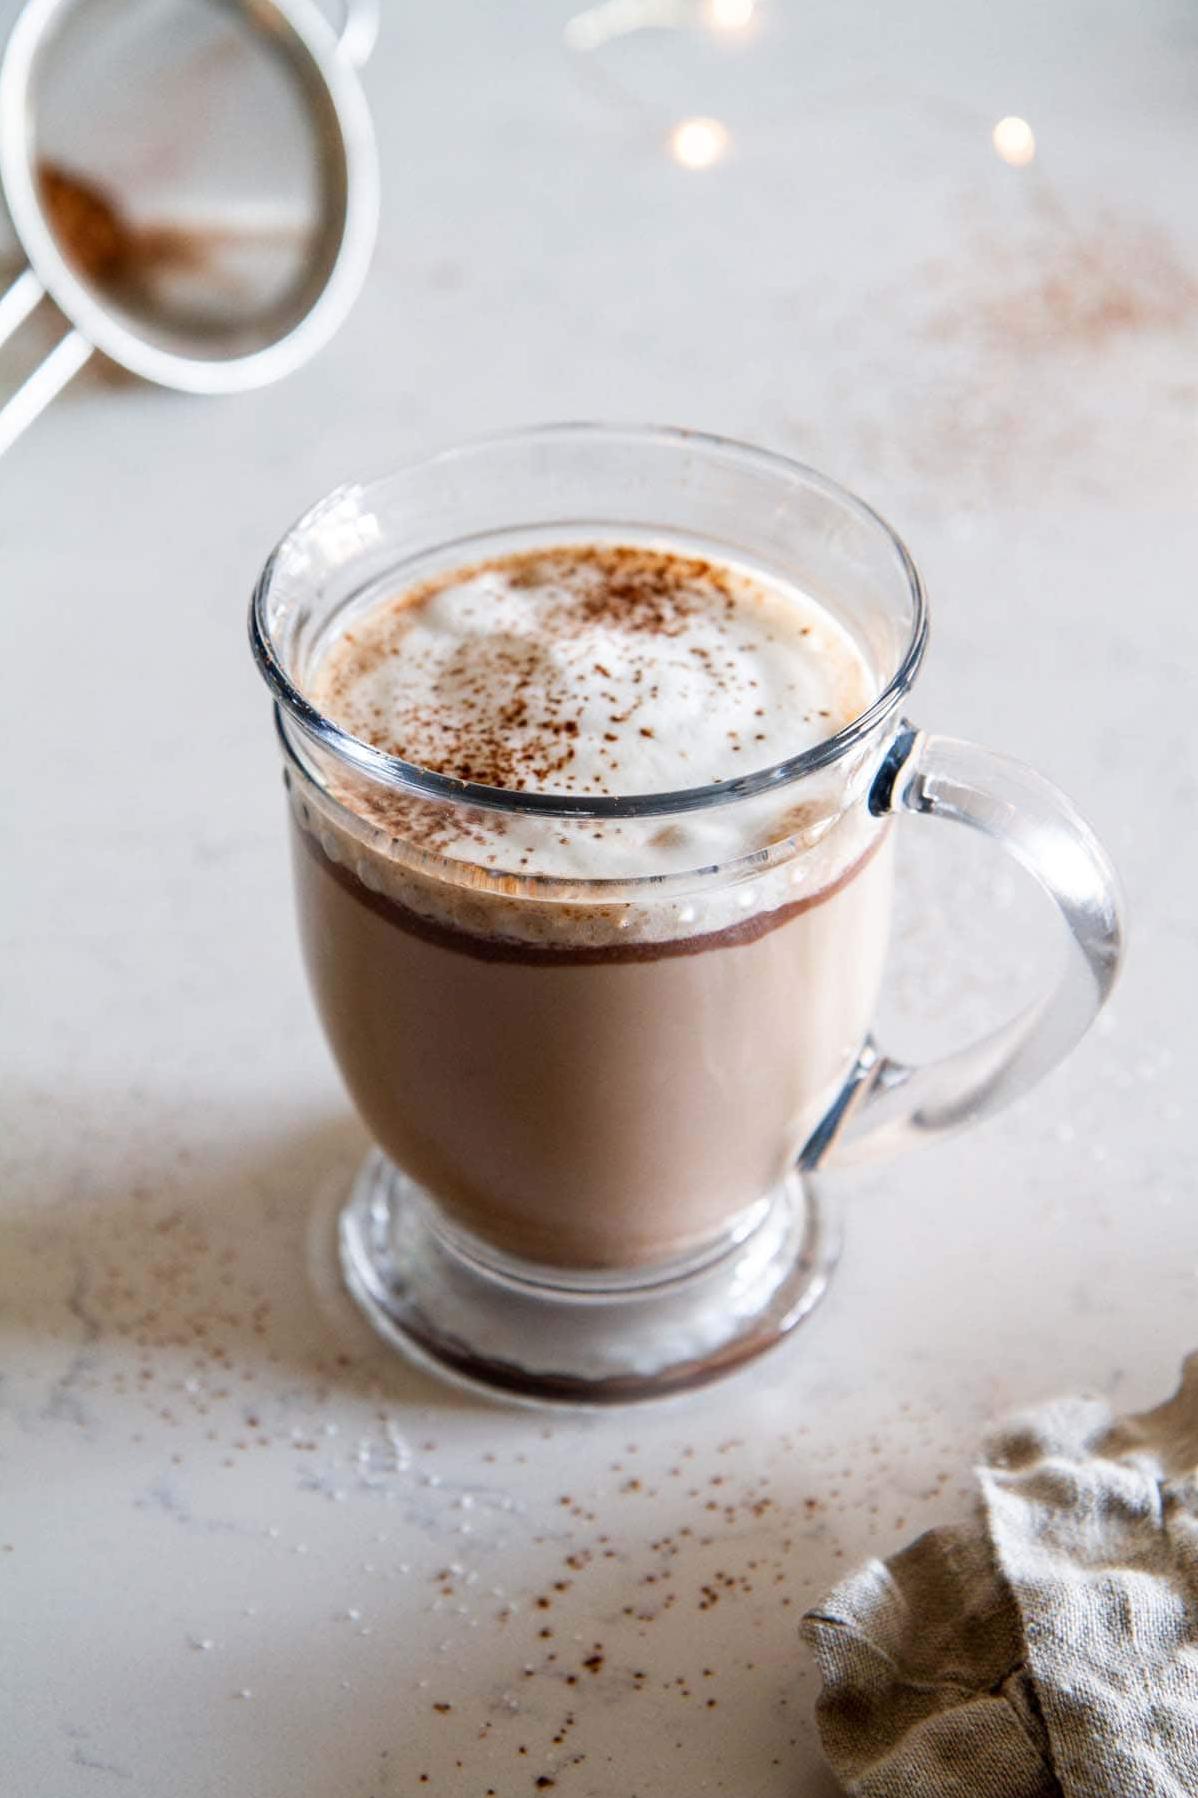  Start your day on a sweet note with this delicious latte recipe